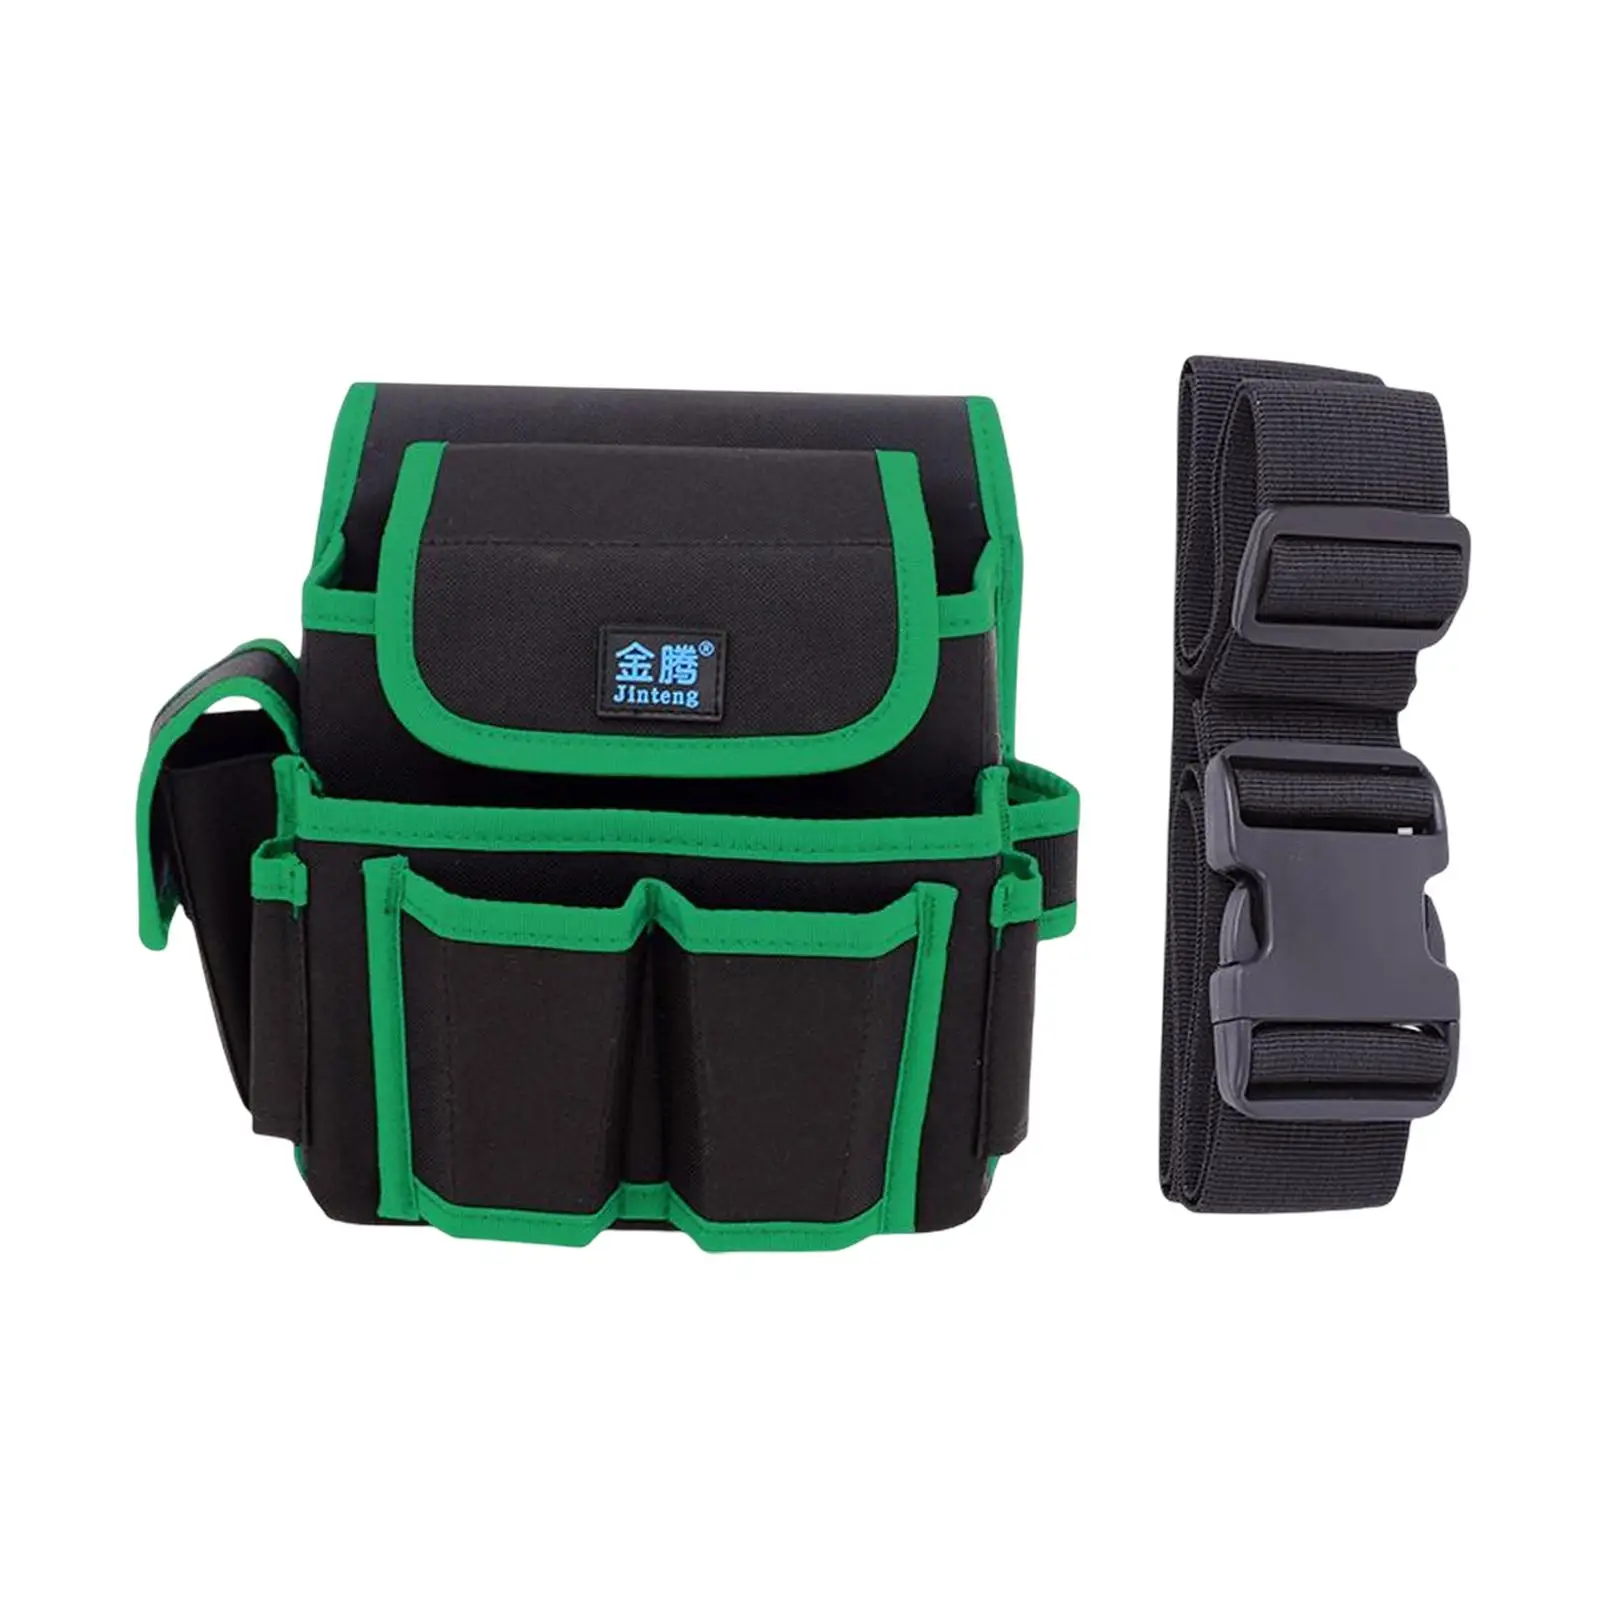 Portable Gardening Tool Waist Bag with Adjustable Belt Hardware Tool Pocket Water Resistant Oxford for Pliers Screwdrivers